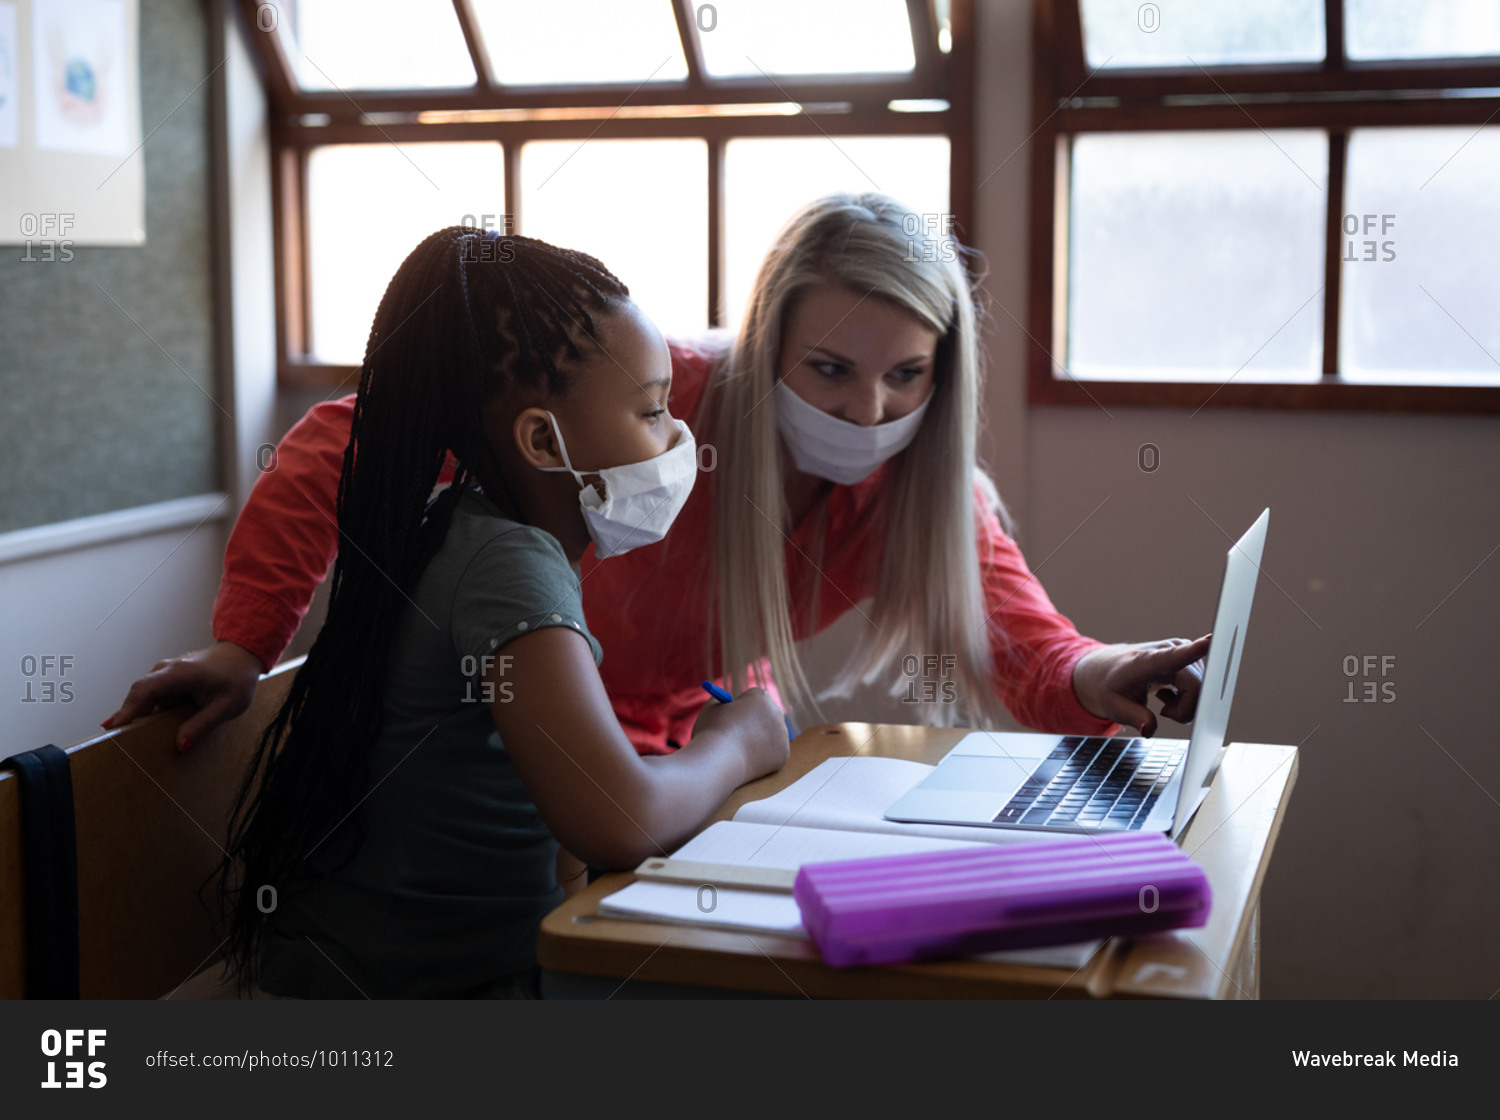 Female Caucasian teacher and mixed race girl wearing face masks using laptop in class at school. Primary education social distancing health safety during Covid19 Coronavirus pandemic.